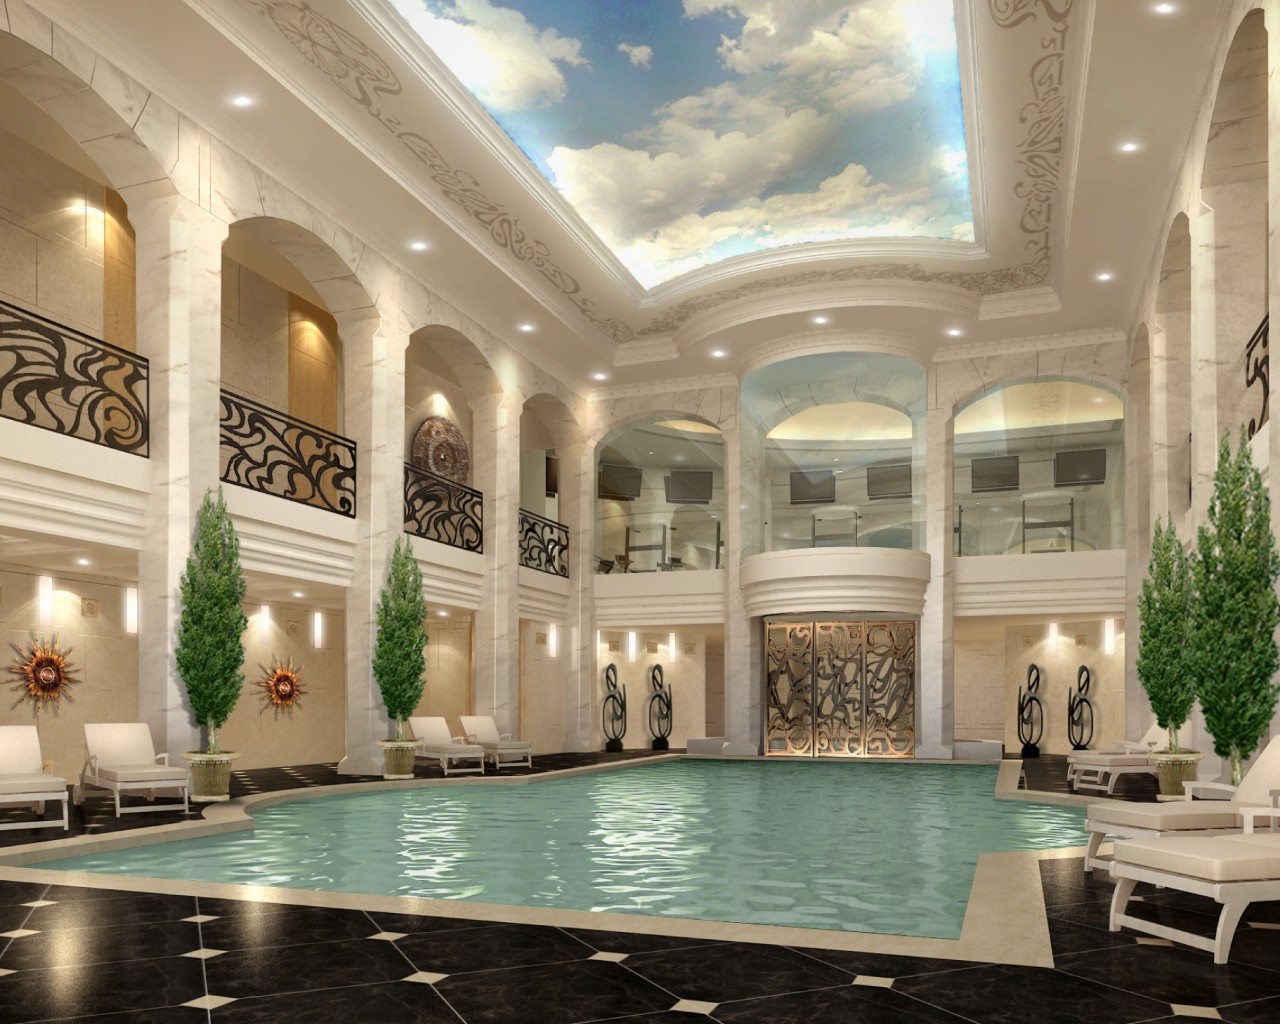 The hotel's design was inspired by old-world ocean liners.